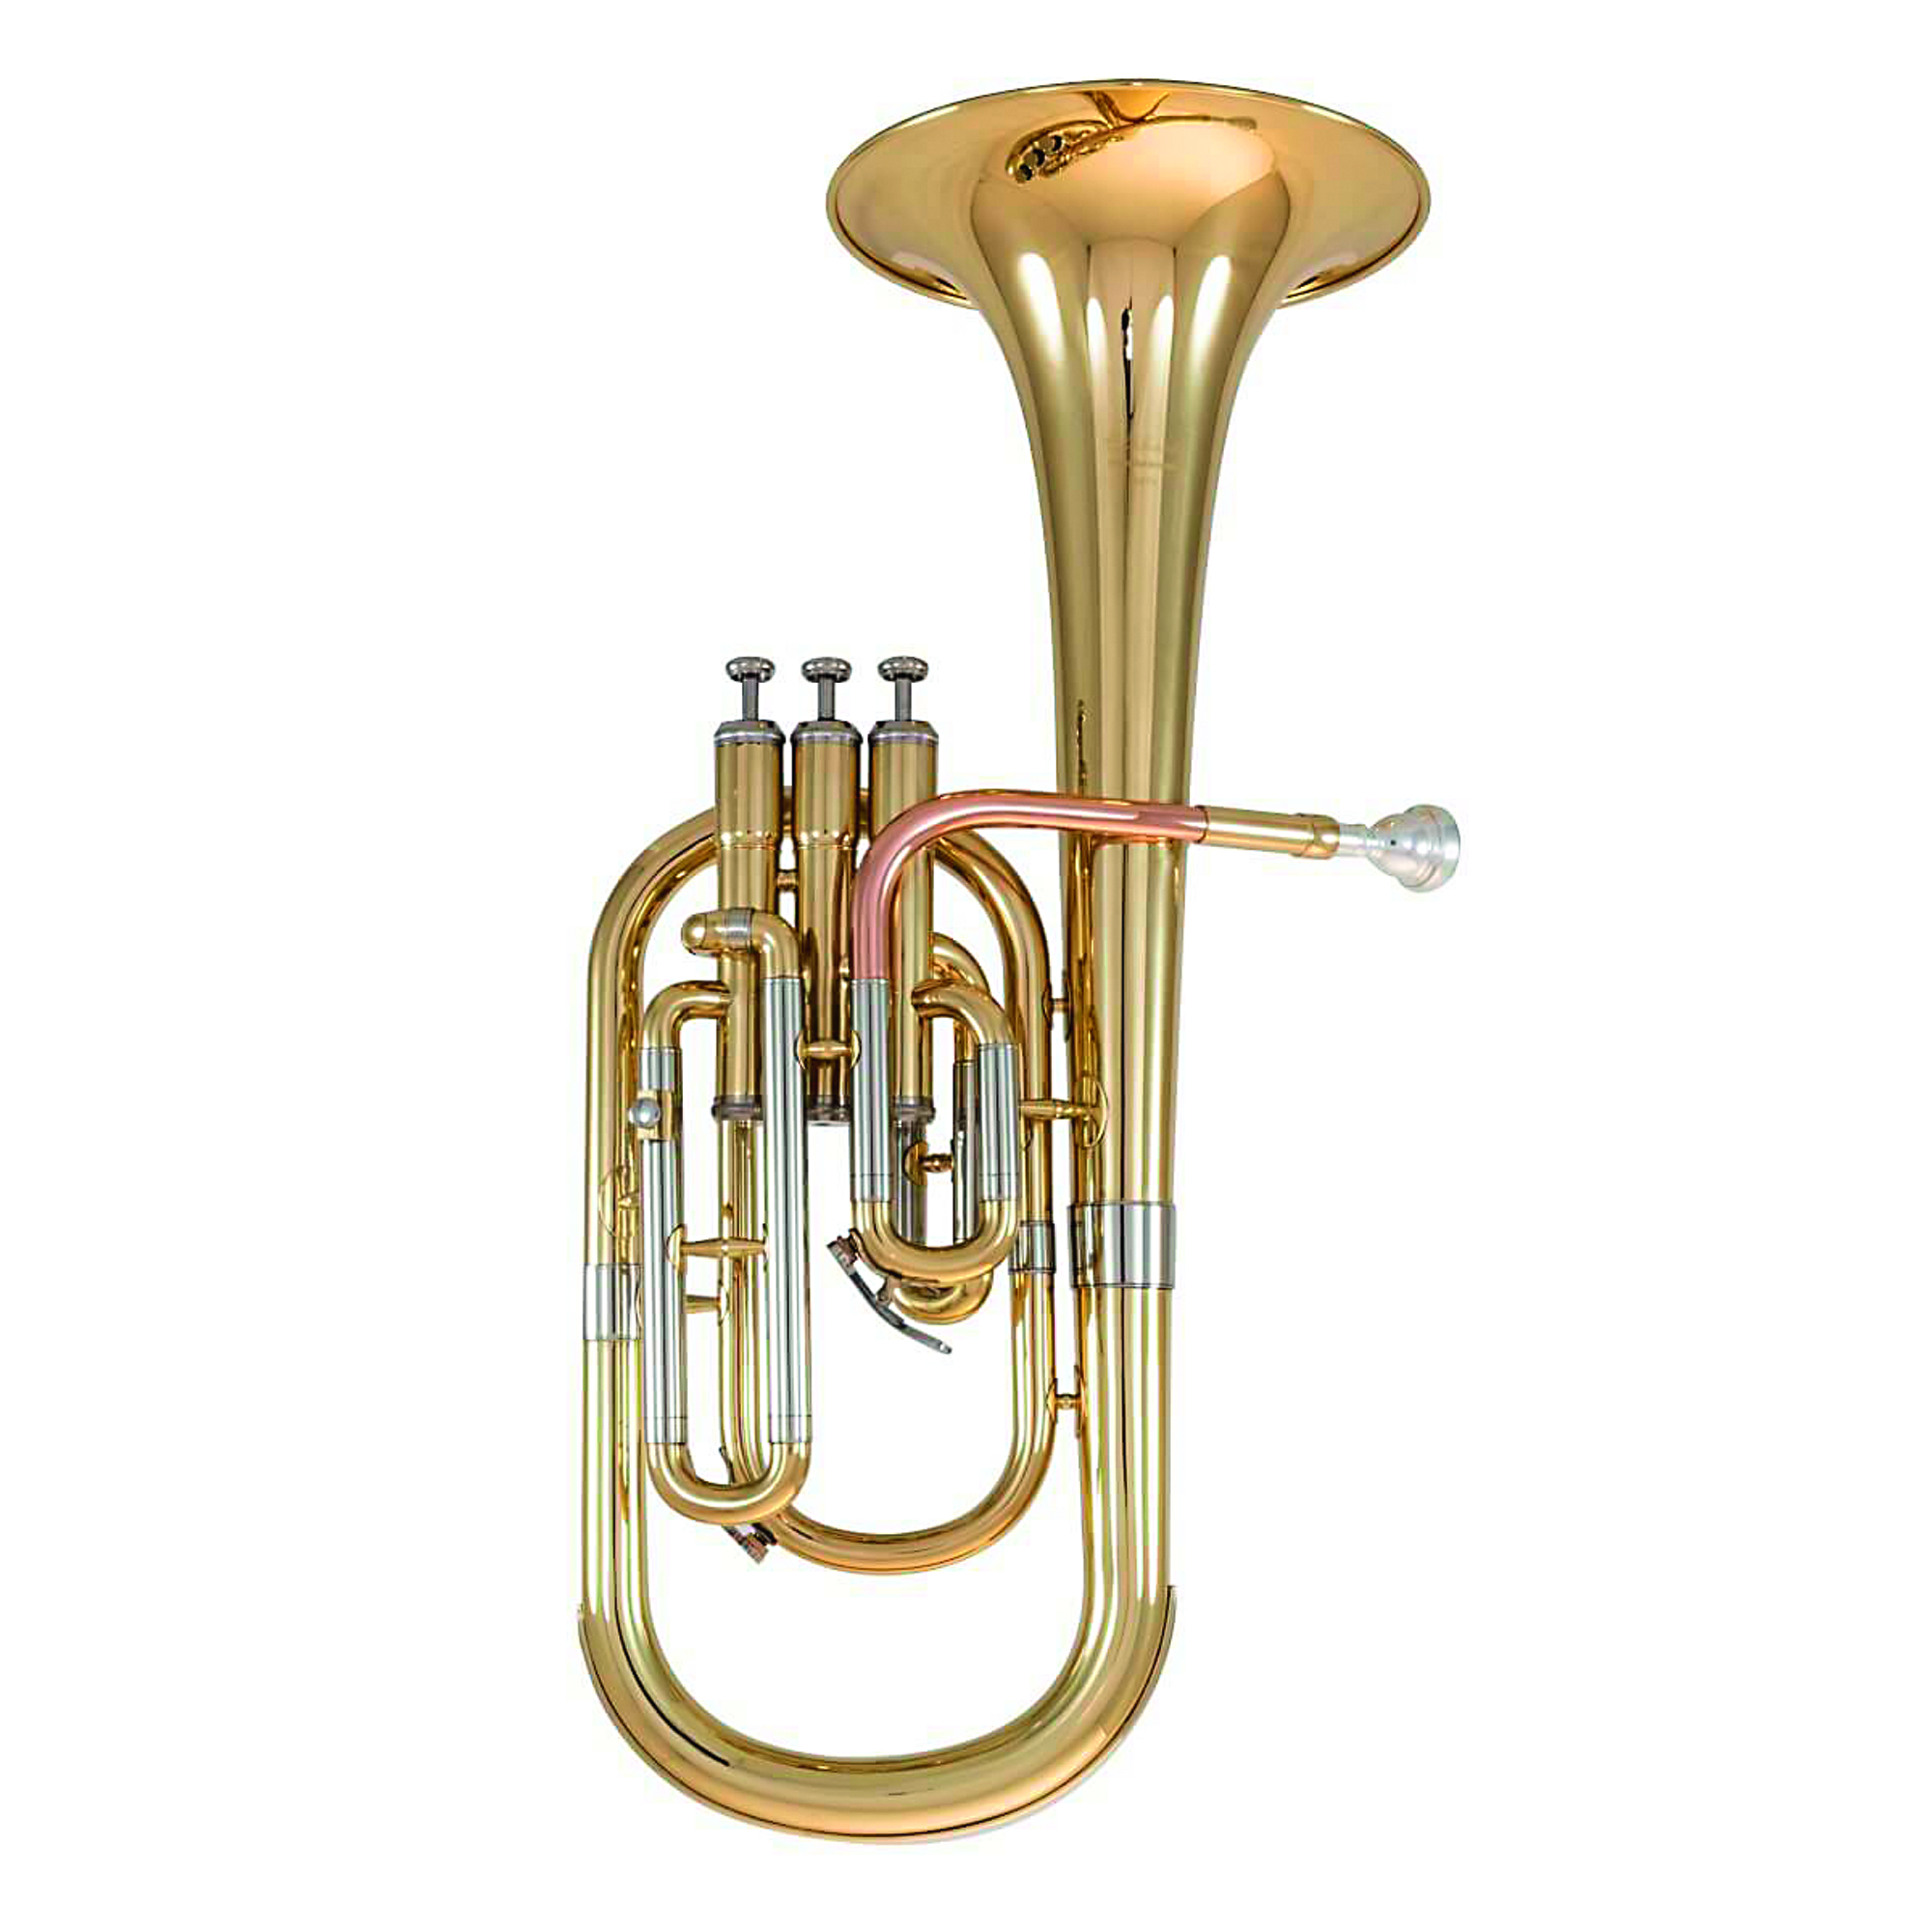 Elkhart Eb Student Tenor Horn Outfit